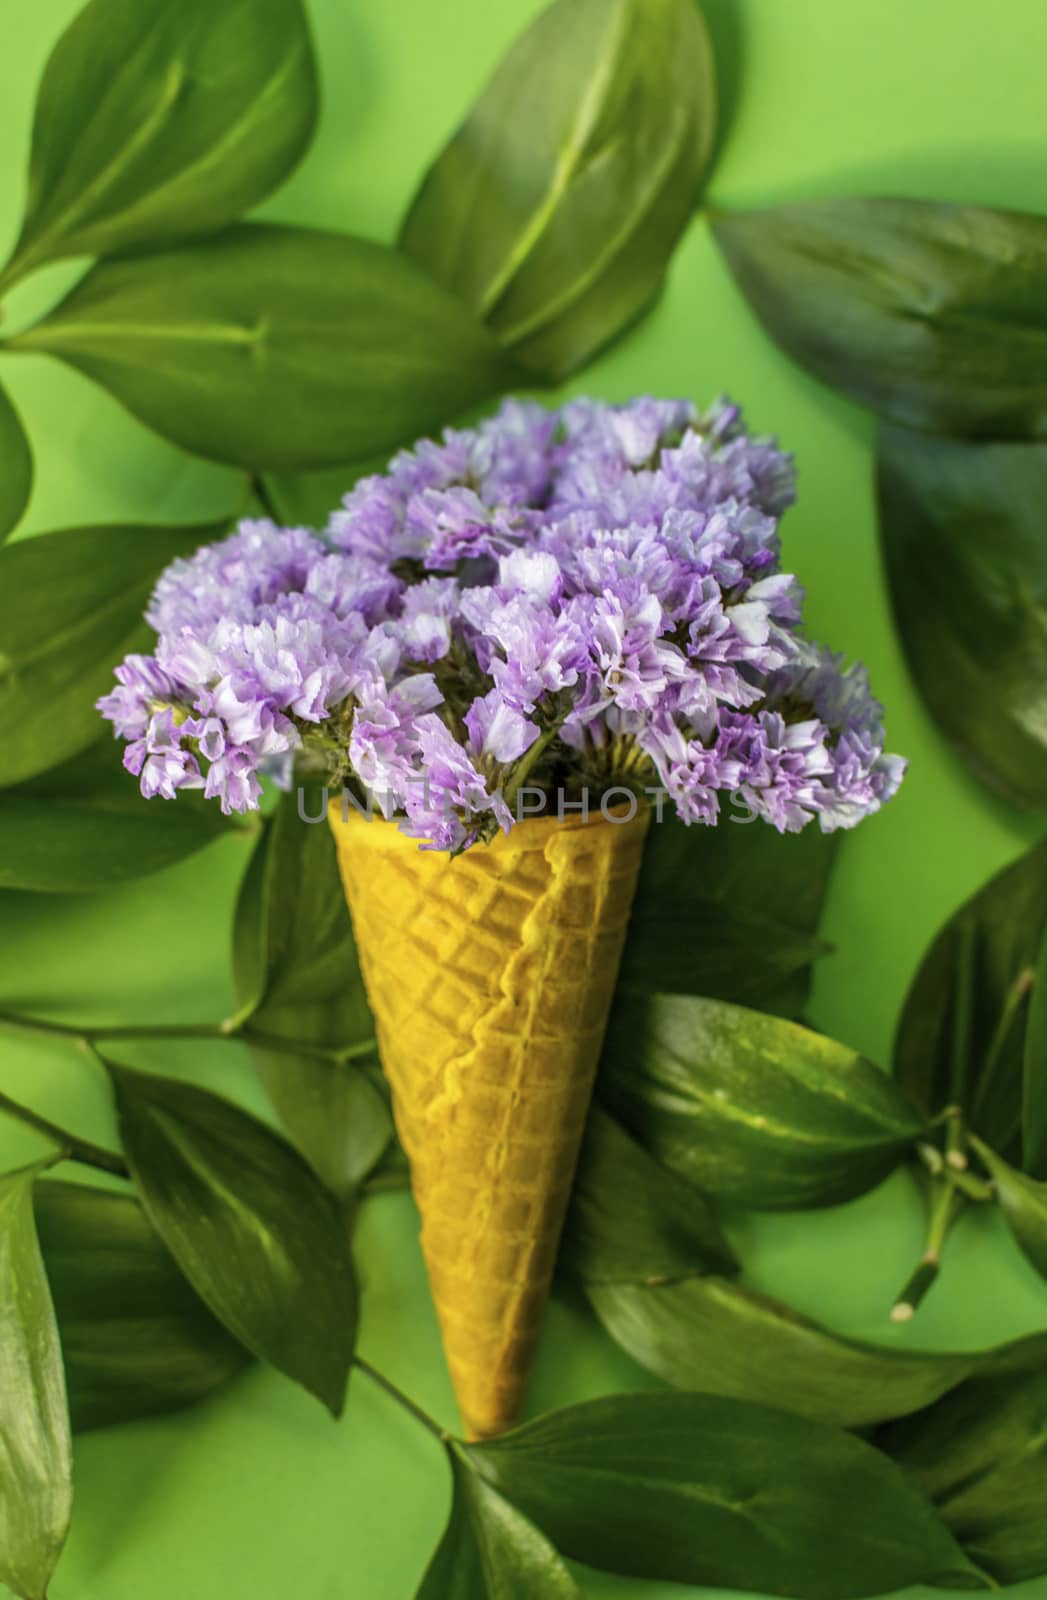 Waffle cone with violet flowers with leaves by Izumepho